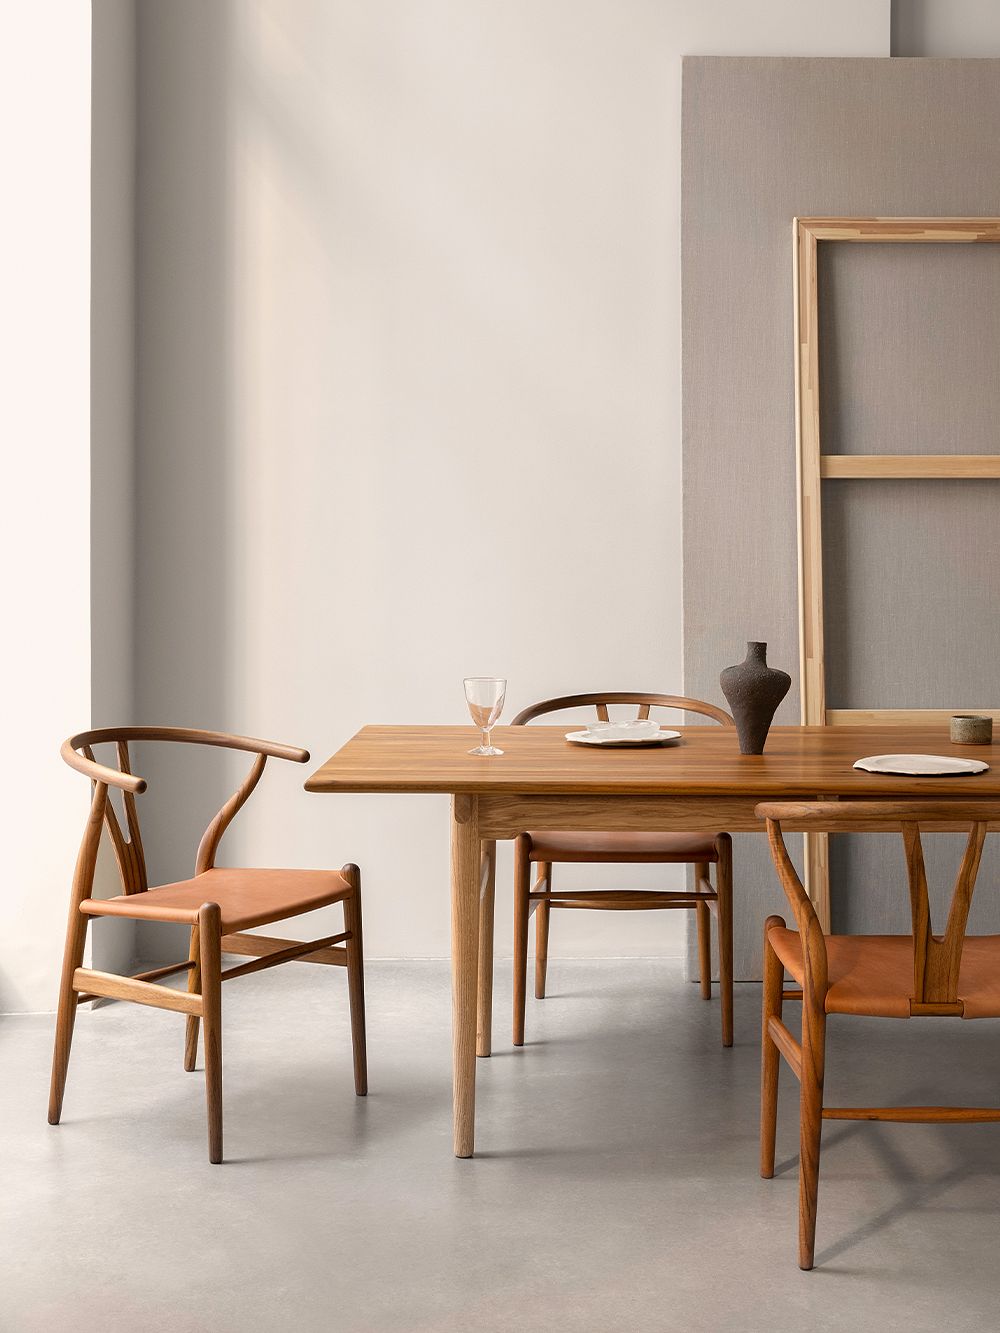 An image featuring Carl Hansen & Søn's Wishbone chairs around the table as part of the dining room interior.